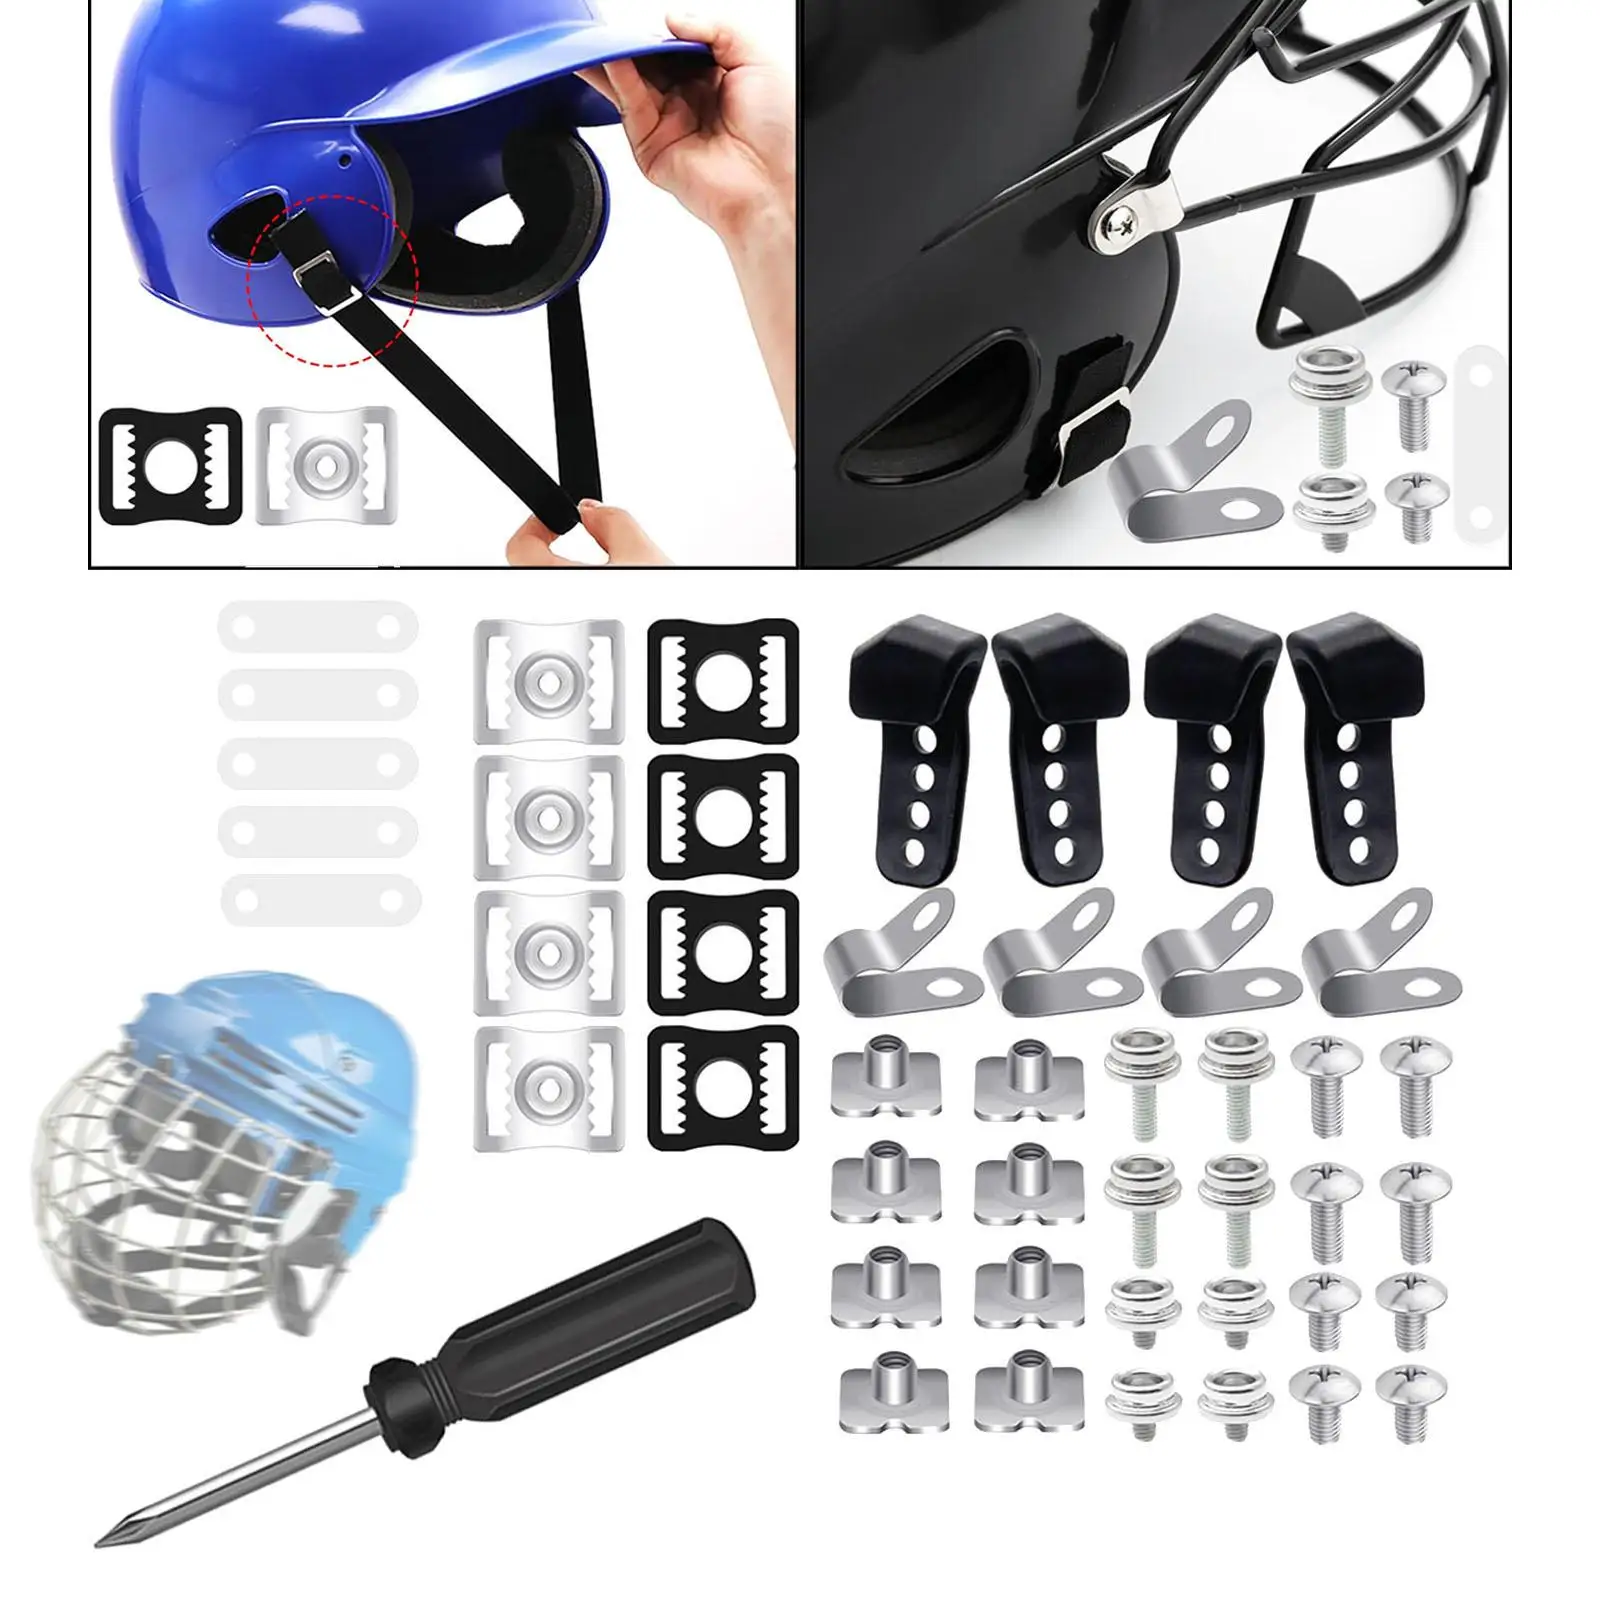 Hockey Visor Hardware Screw Repair Kit Washers Nuts Replacement Durable Universal Easy to Replace Fixings Back up Hardwares